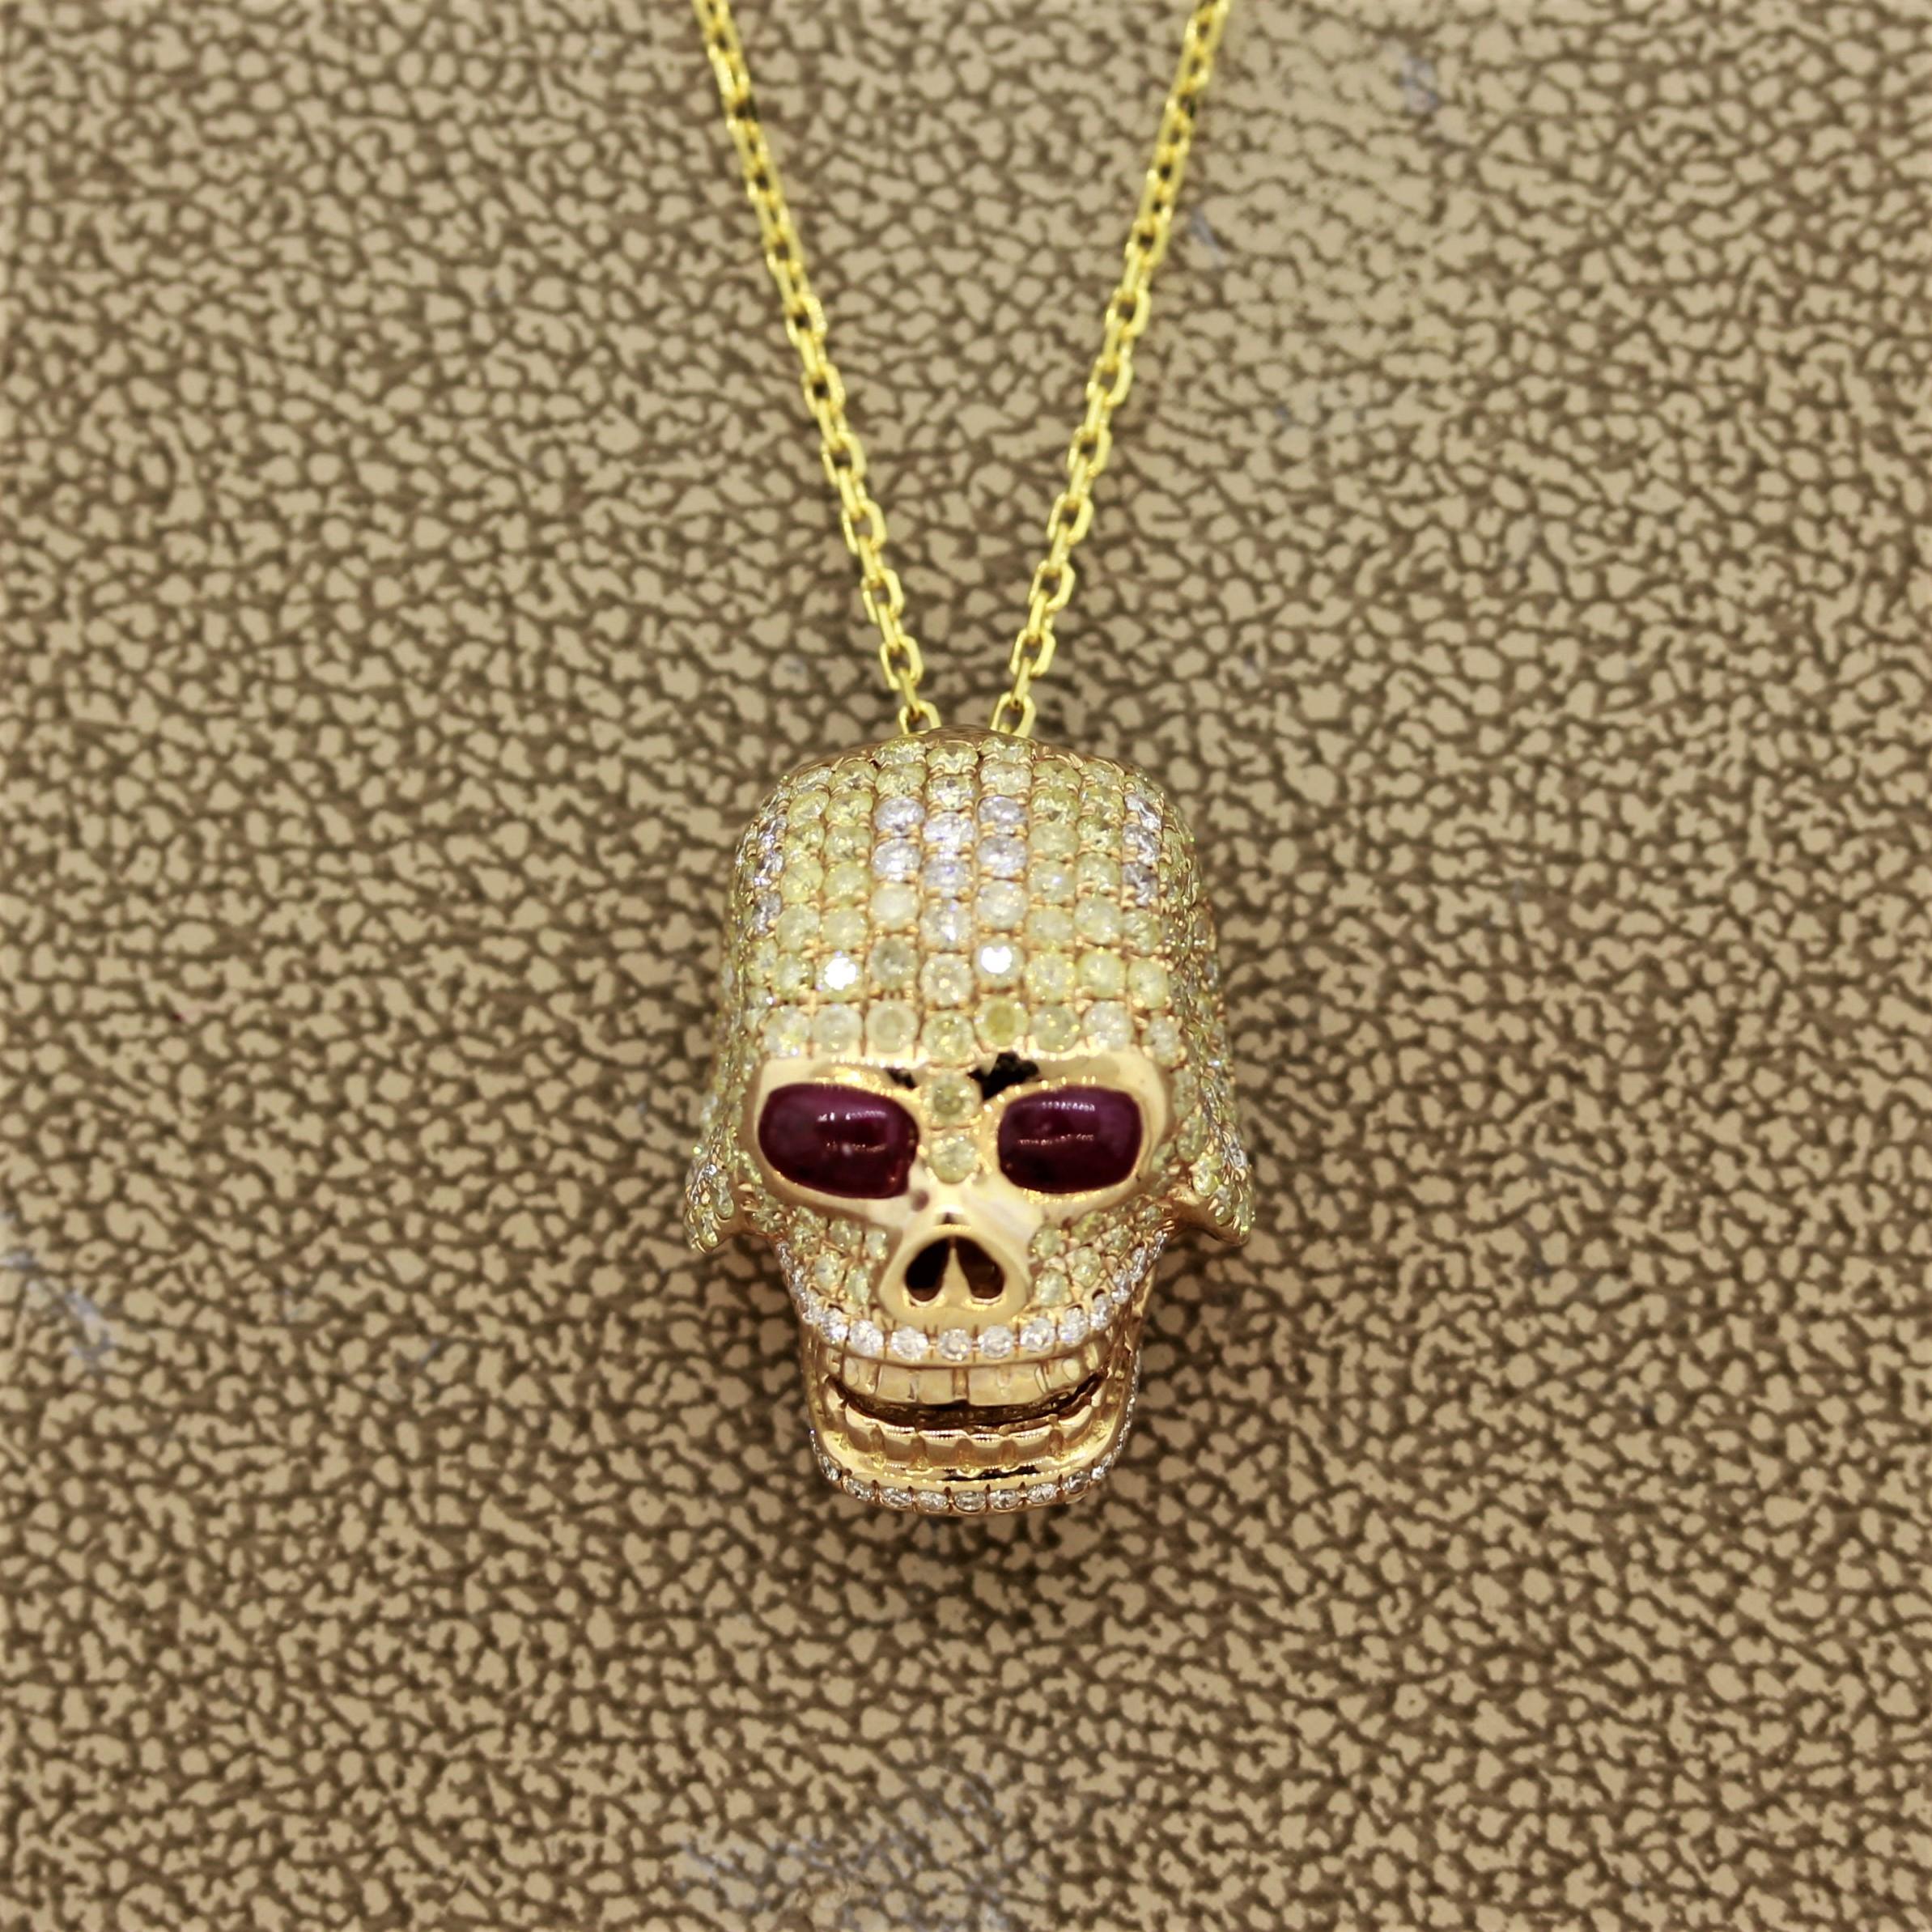 A gold skull pendant featuring 2.01 carats of round brilliant cut fancy colored diamonds. There are 2 ruby cabochons used as the eyes. Made in 18k yellow gold and comes with an 18k gold necklace.

Pendant Length: 0.75 inches

Necklace Length: 18